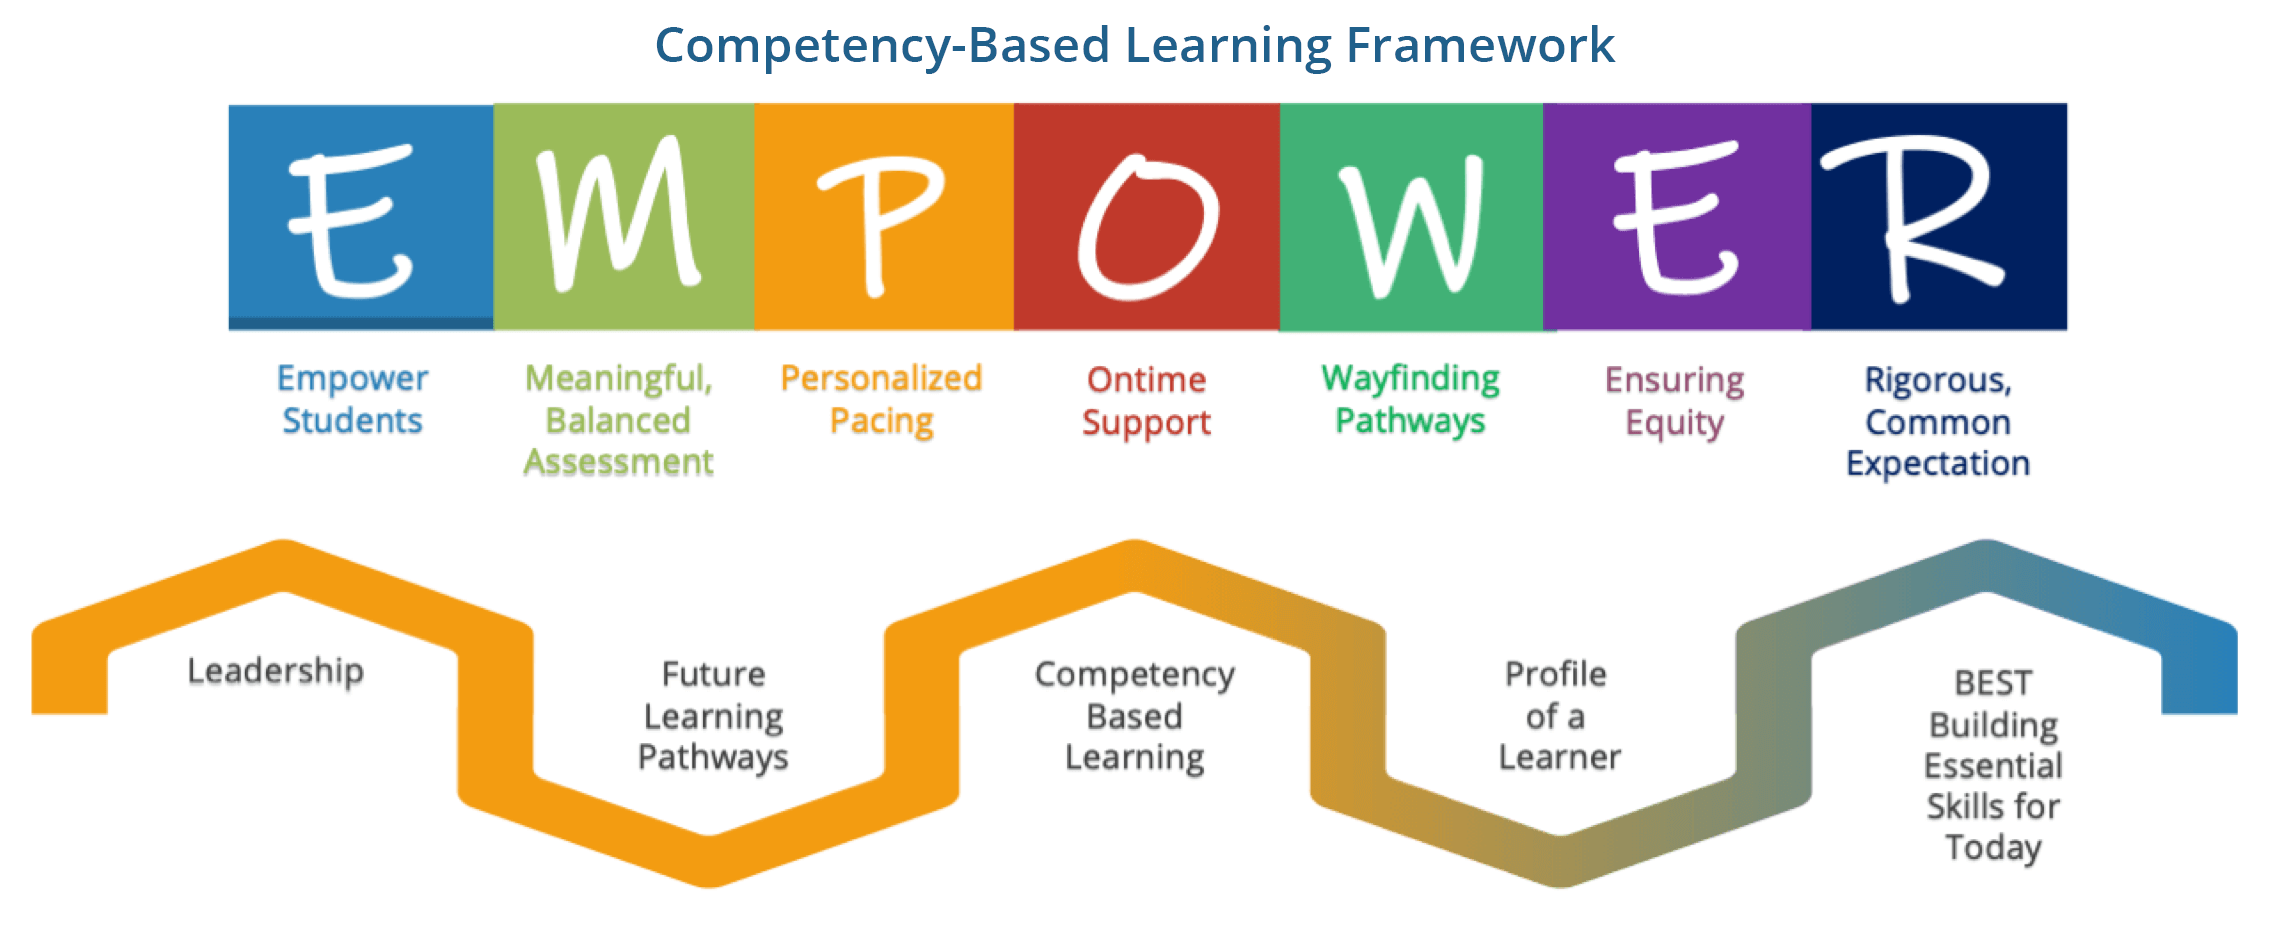 EMPOWER - empower students; meaningful, balanced assessments; personalized pacing; ontime support; wayfinding pathways; ensuring equity; rigorous, common expectation